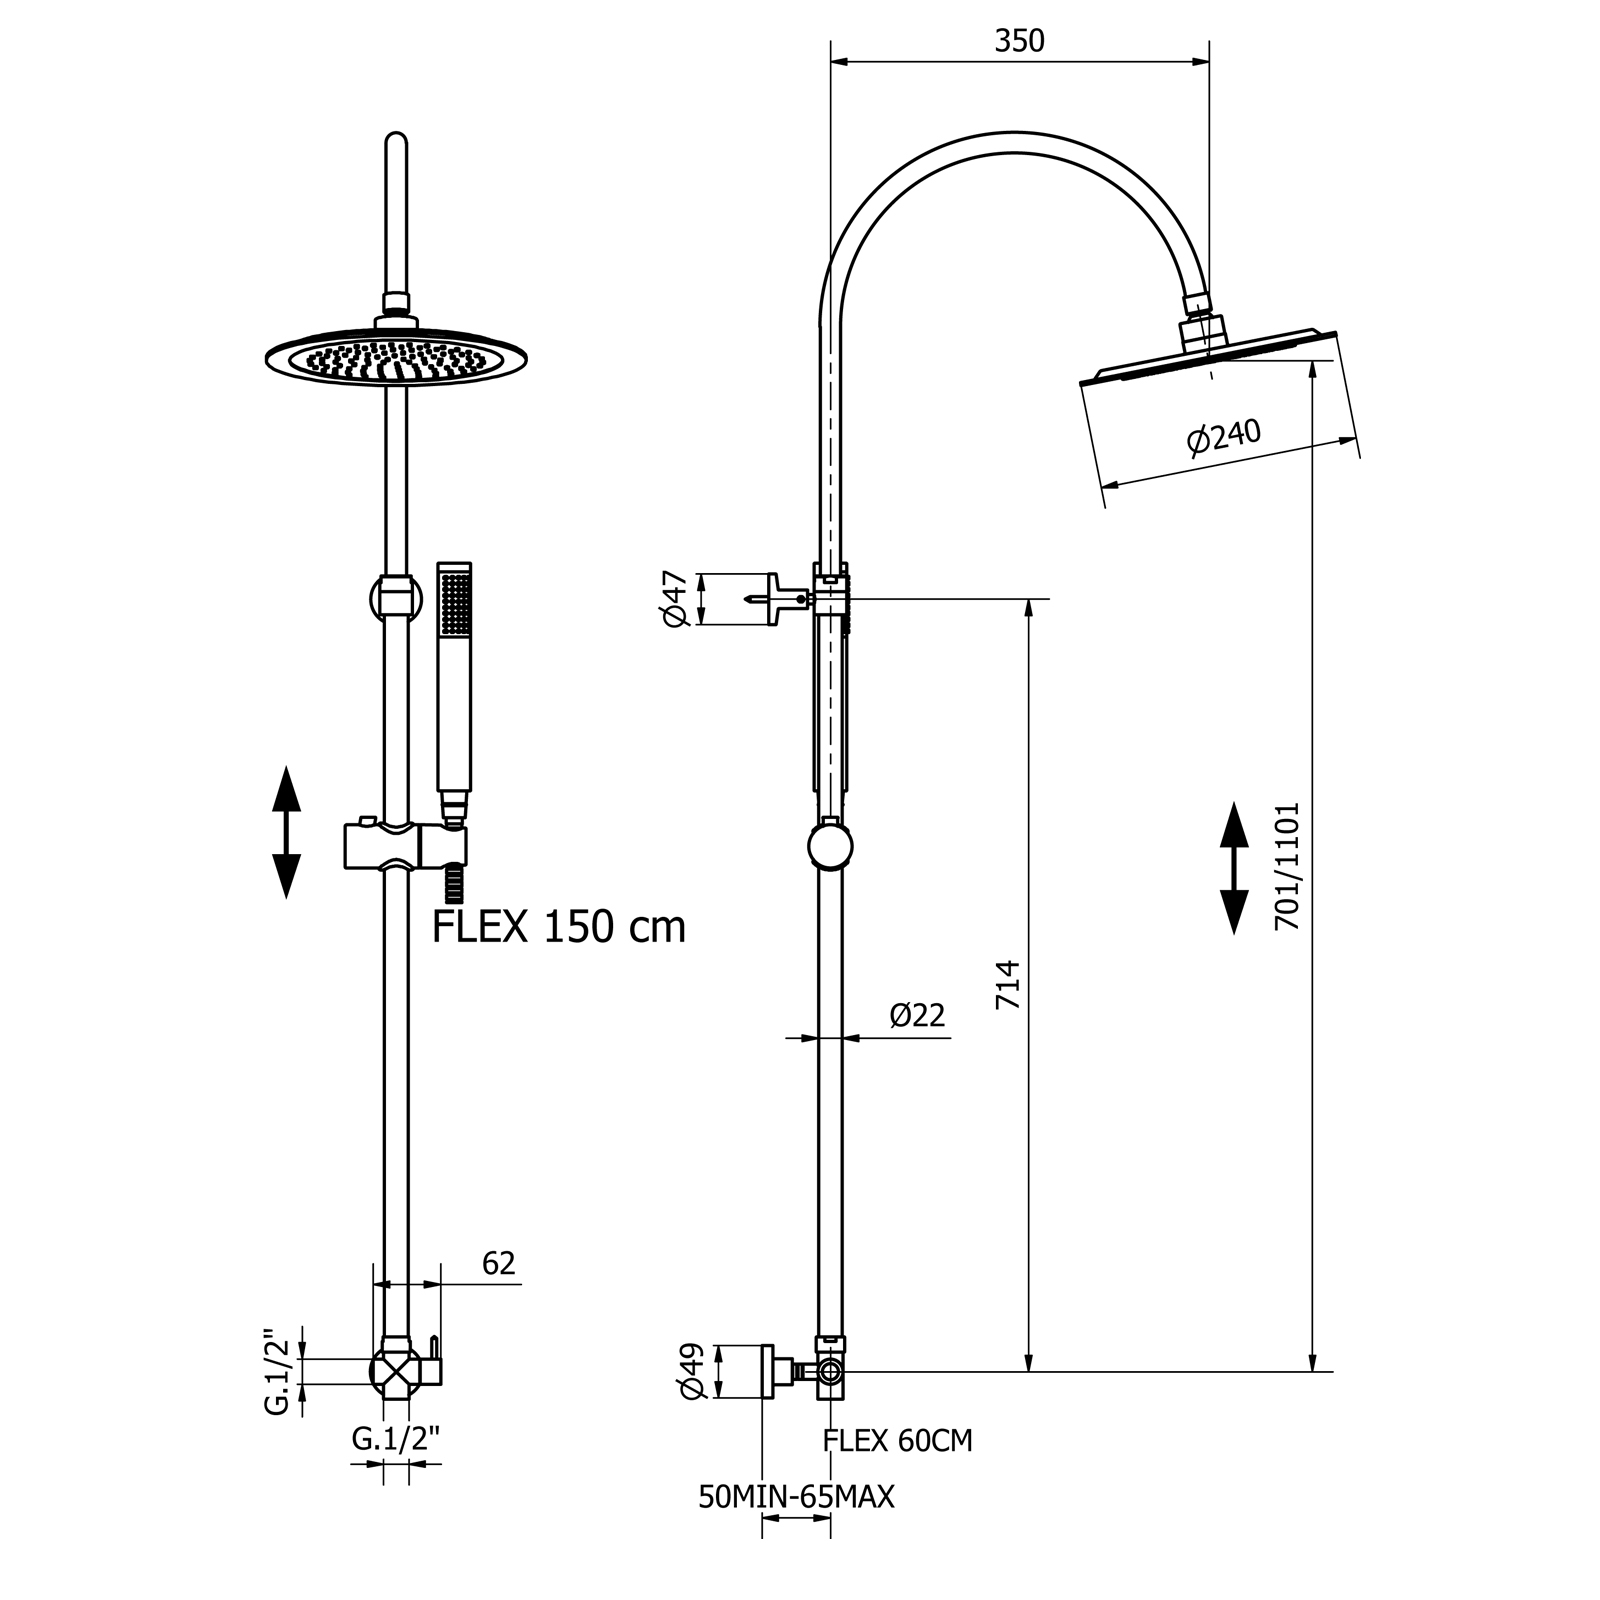 Telescopic shower column with automatic diverter, wall bracket, with shower rose and self cleaning hand shower